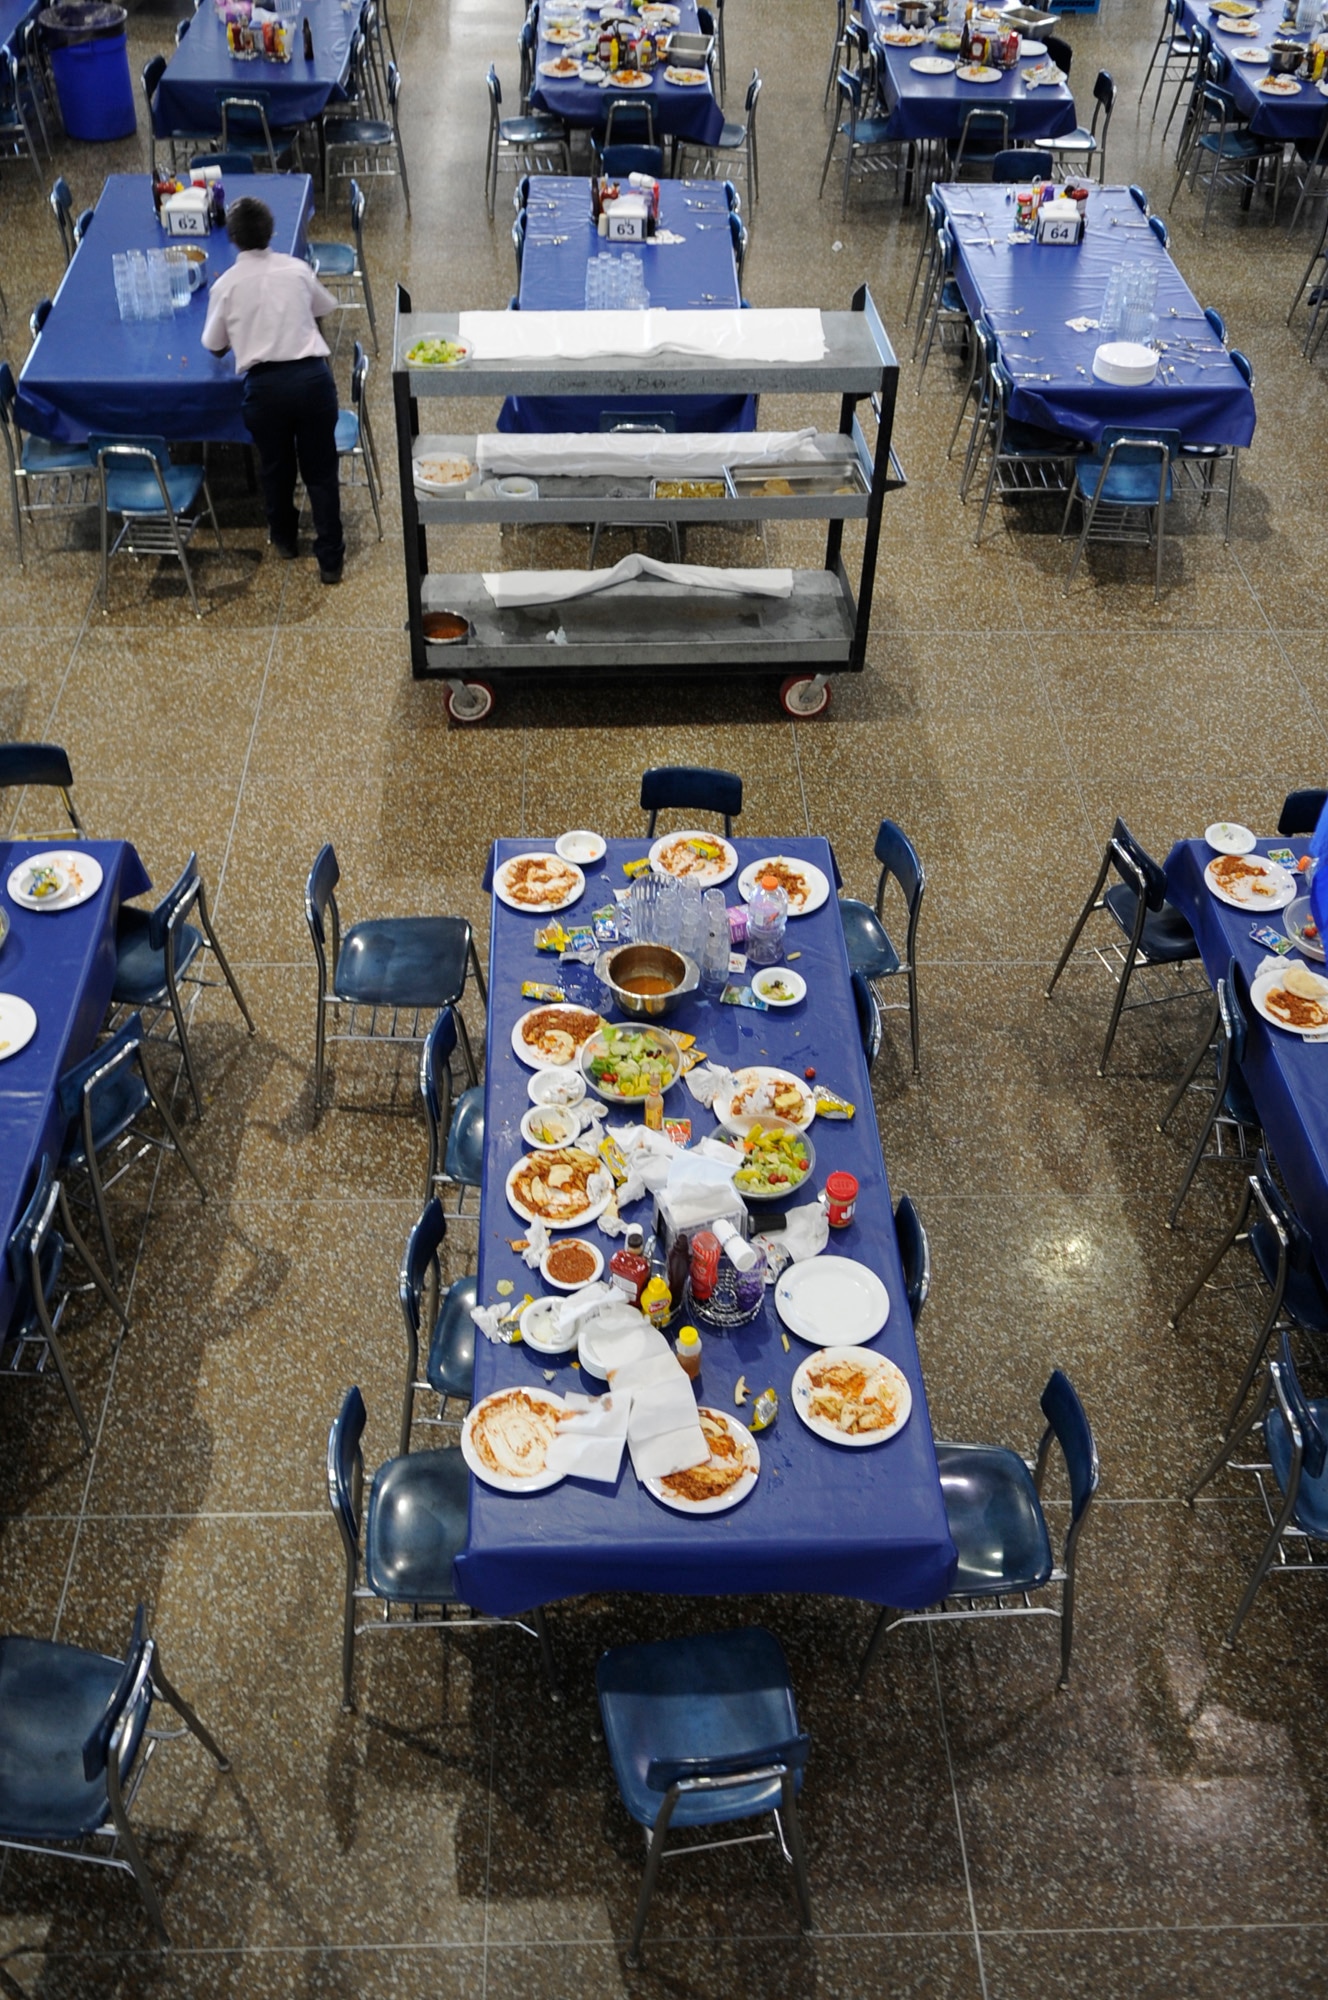 A worker clears off a table after lunch at the Mitchell Hall Cadet Dining Facility Jan. 23 at the U.S. Air Force Academy in Colorado Springs, Colo. The dining facility feeds approximately 4450 cadets and sits on 1.75 acres. (U.S Air Force photo/Staff Sgt. Desiree N. Palacios)